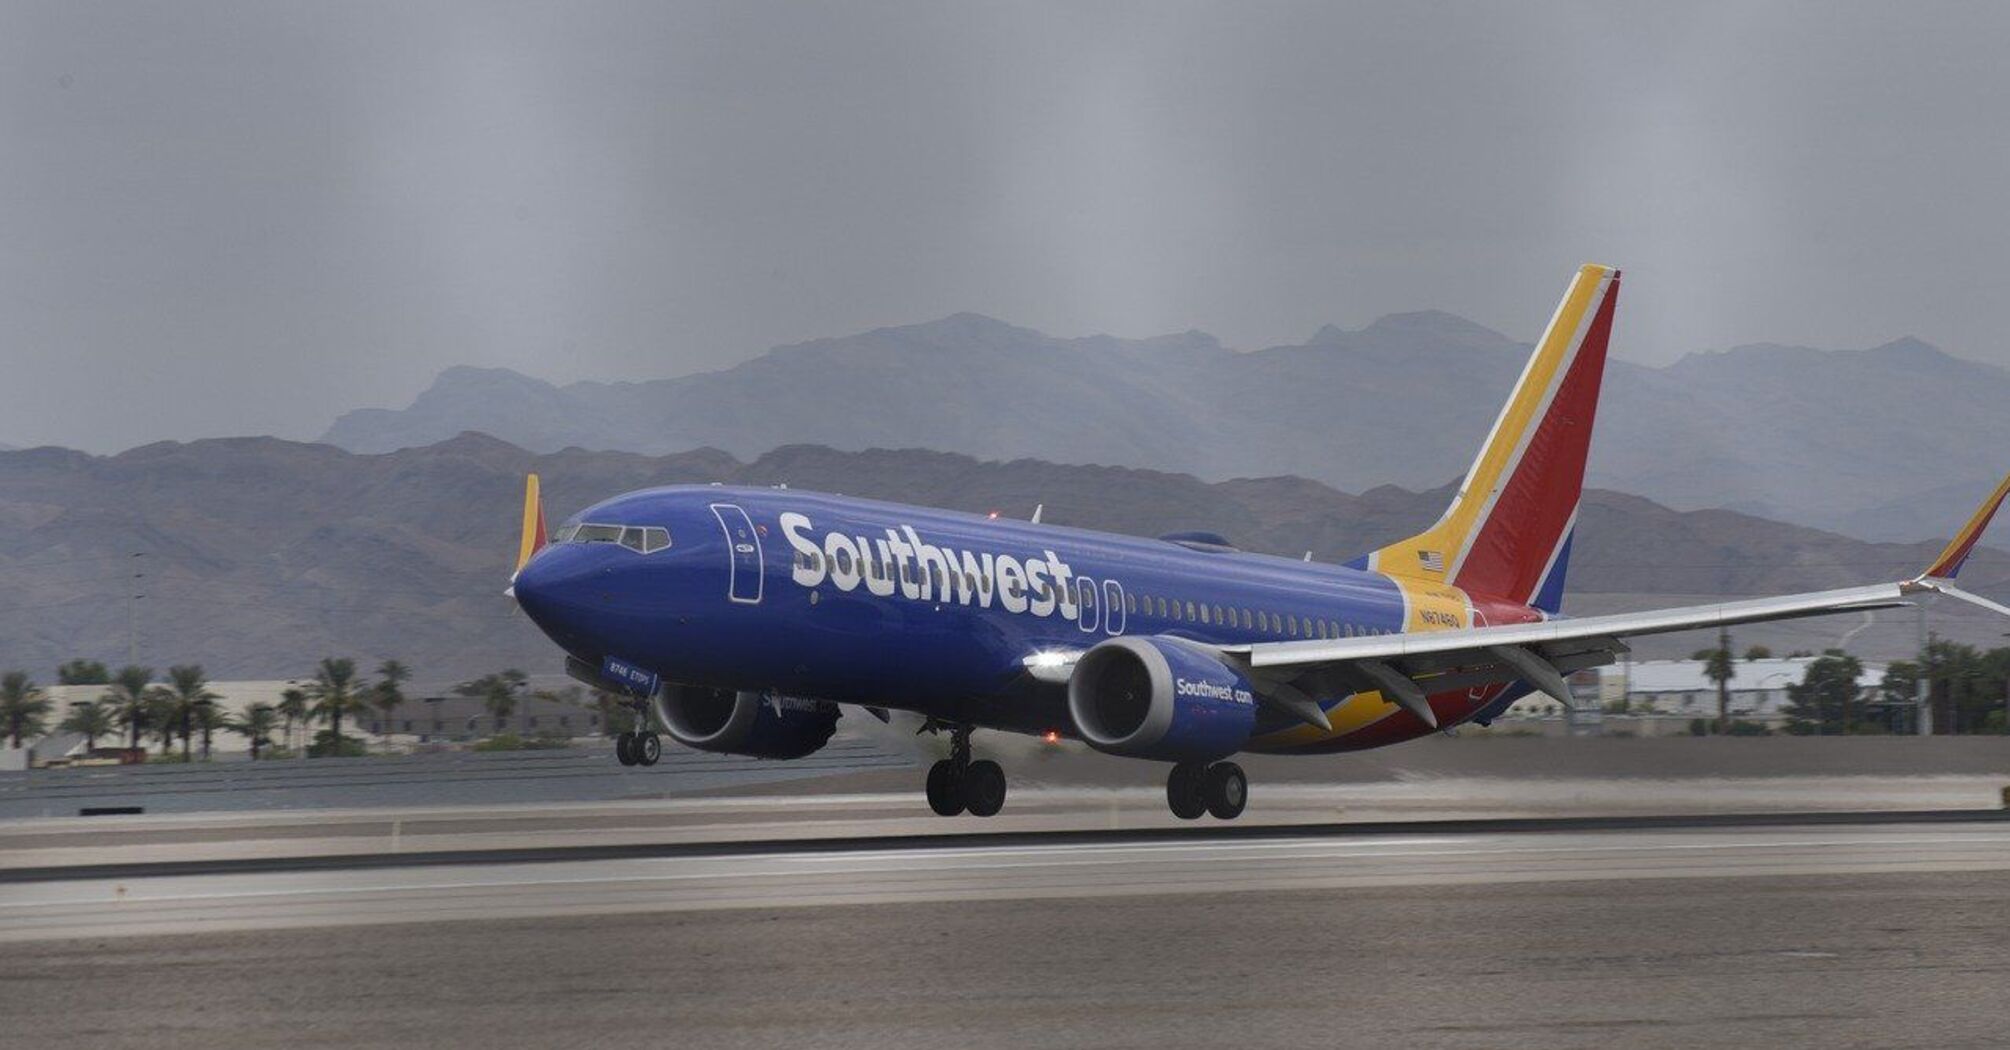 Southwest Airlines flight interrupted after the plane's engine caught fire in flight